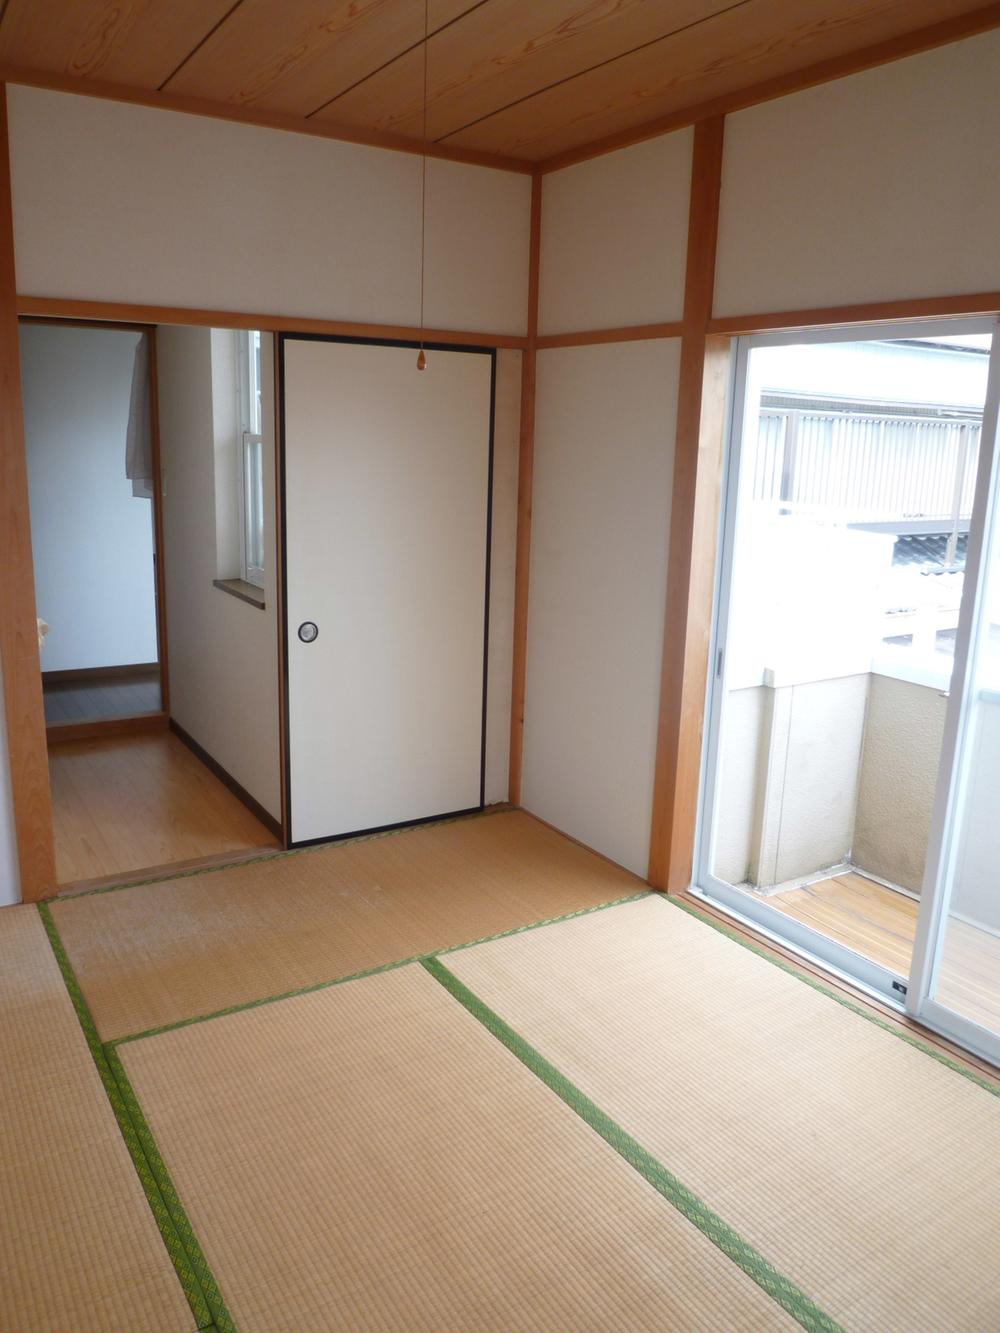 Non-living room. Second floor Japanese-style room with a balcony